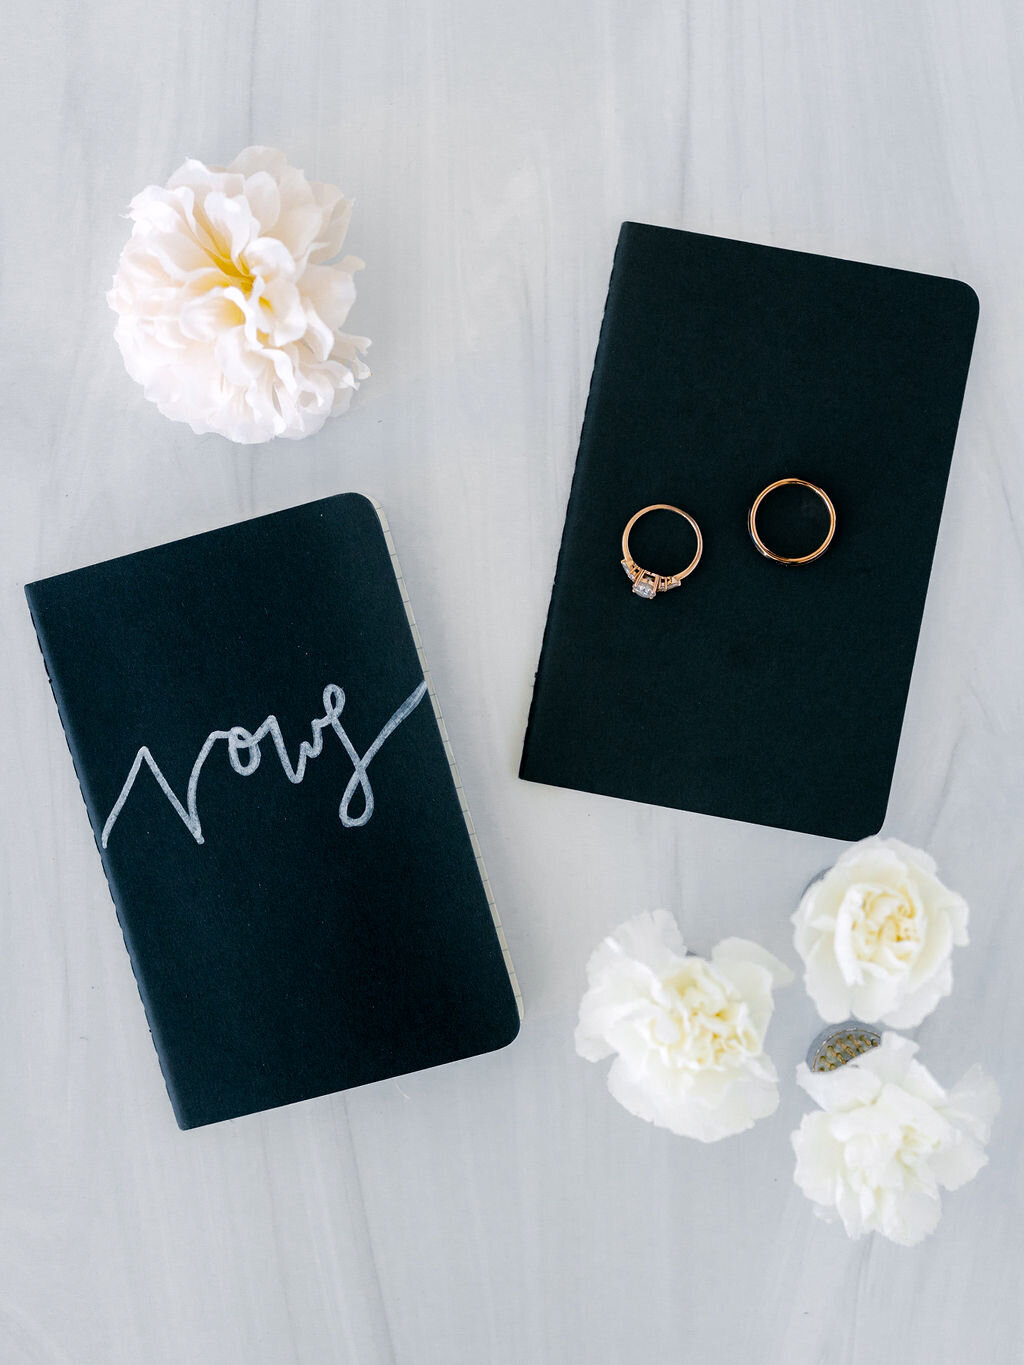 vow-books-wedding-rings-details-classy-simple